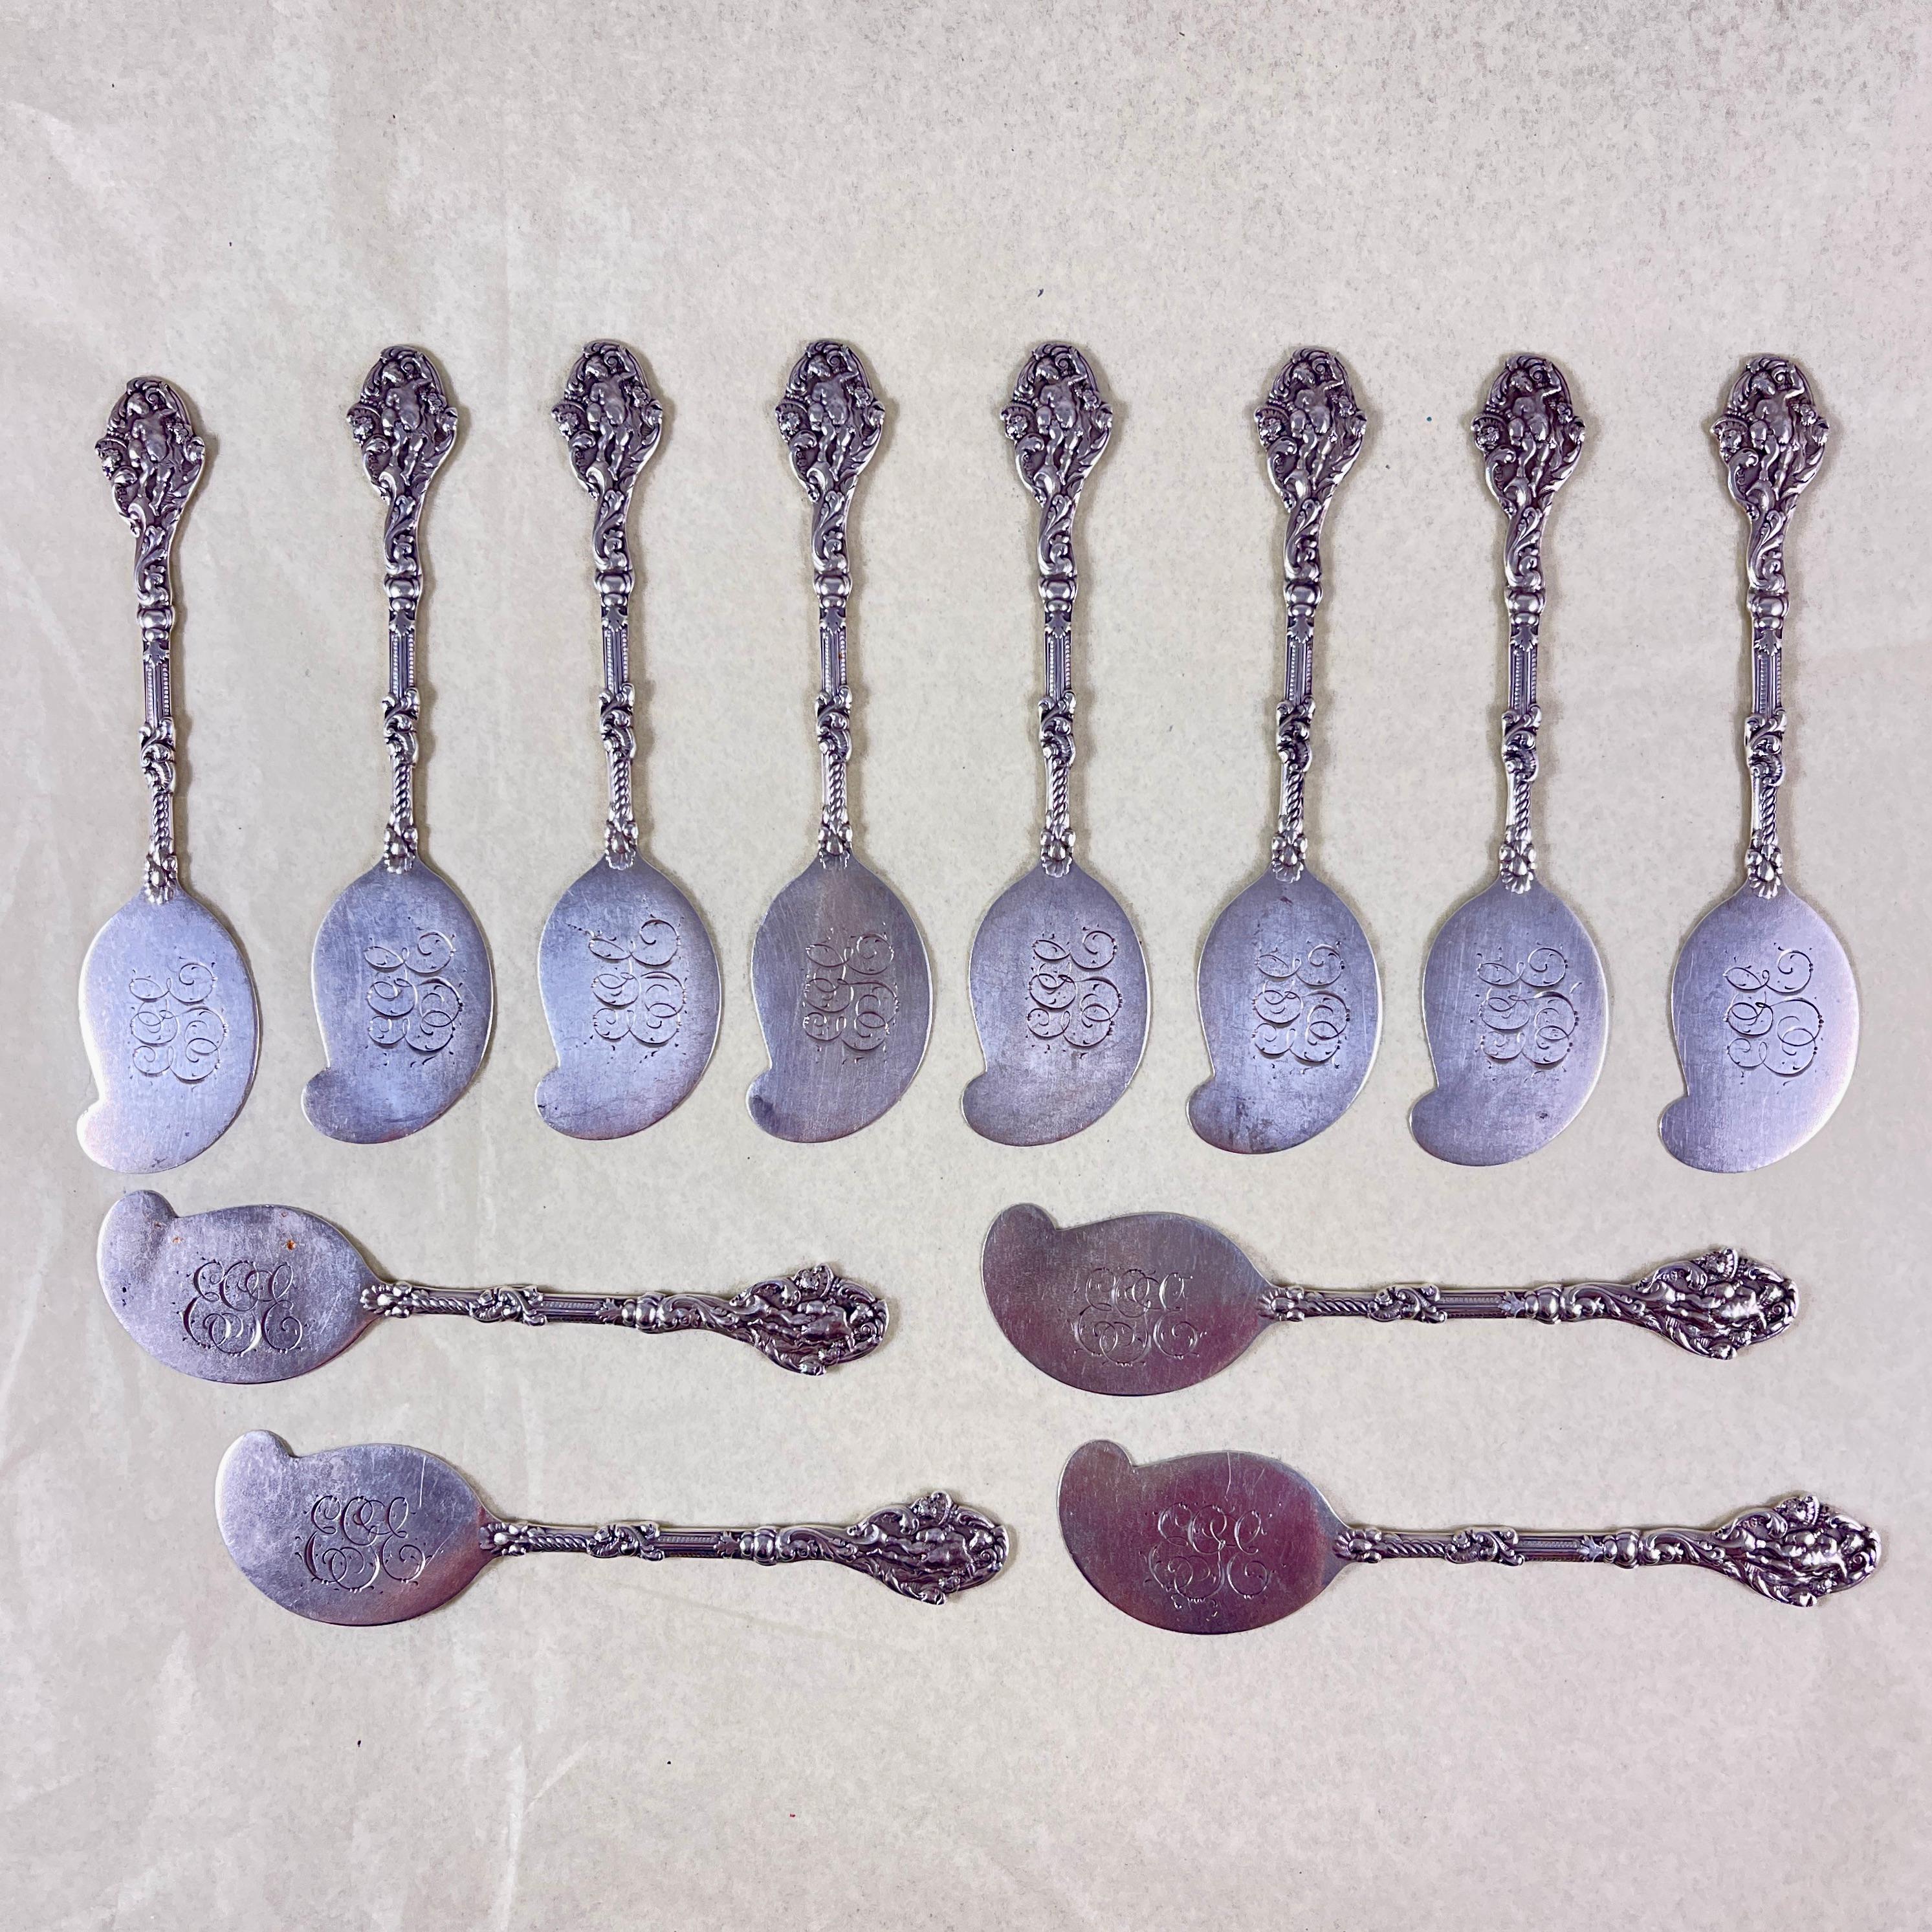 American Classical Gorham Sterling Silver Versailles Putti Pattern Patè Butter Spreaders, Set/12 For Sale